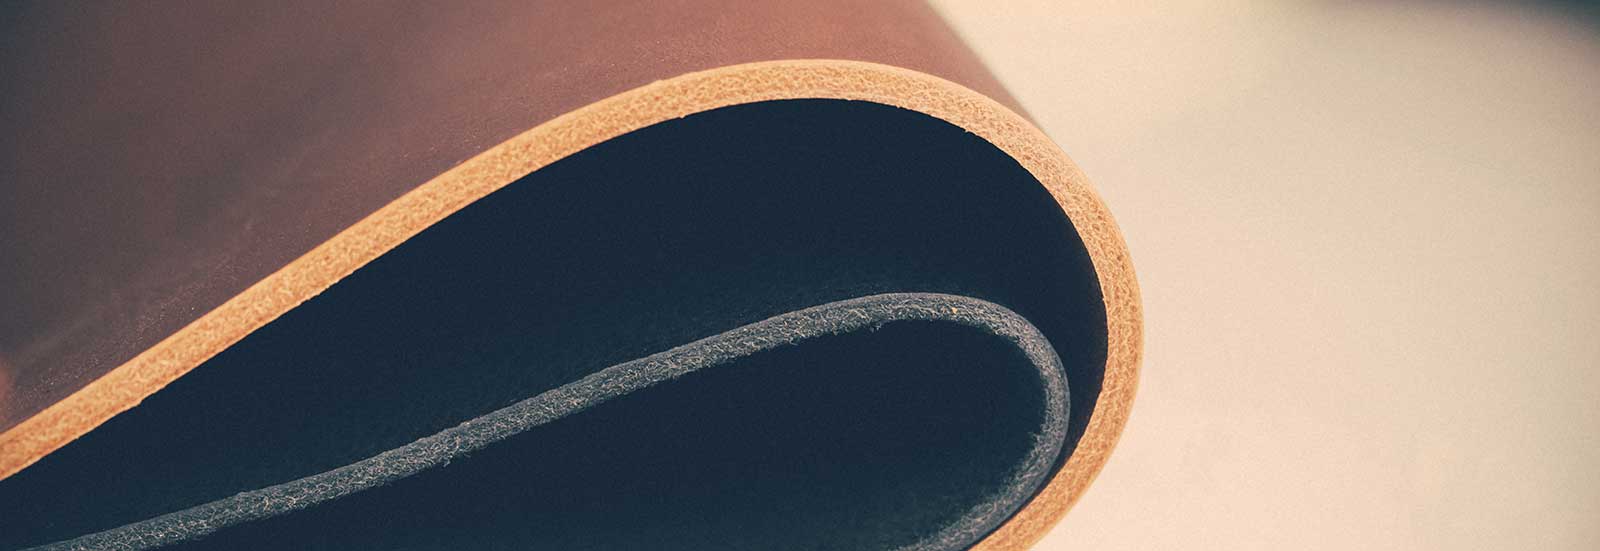 brown and black leather hides for luxury leather portfolios, albums and binders